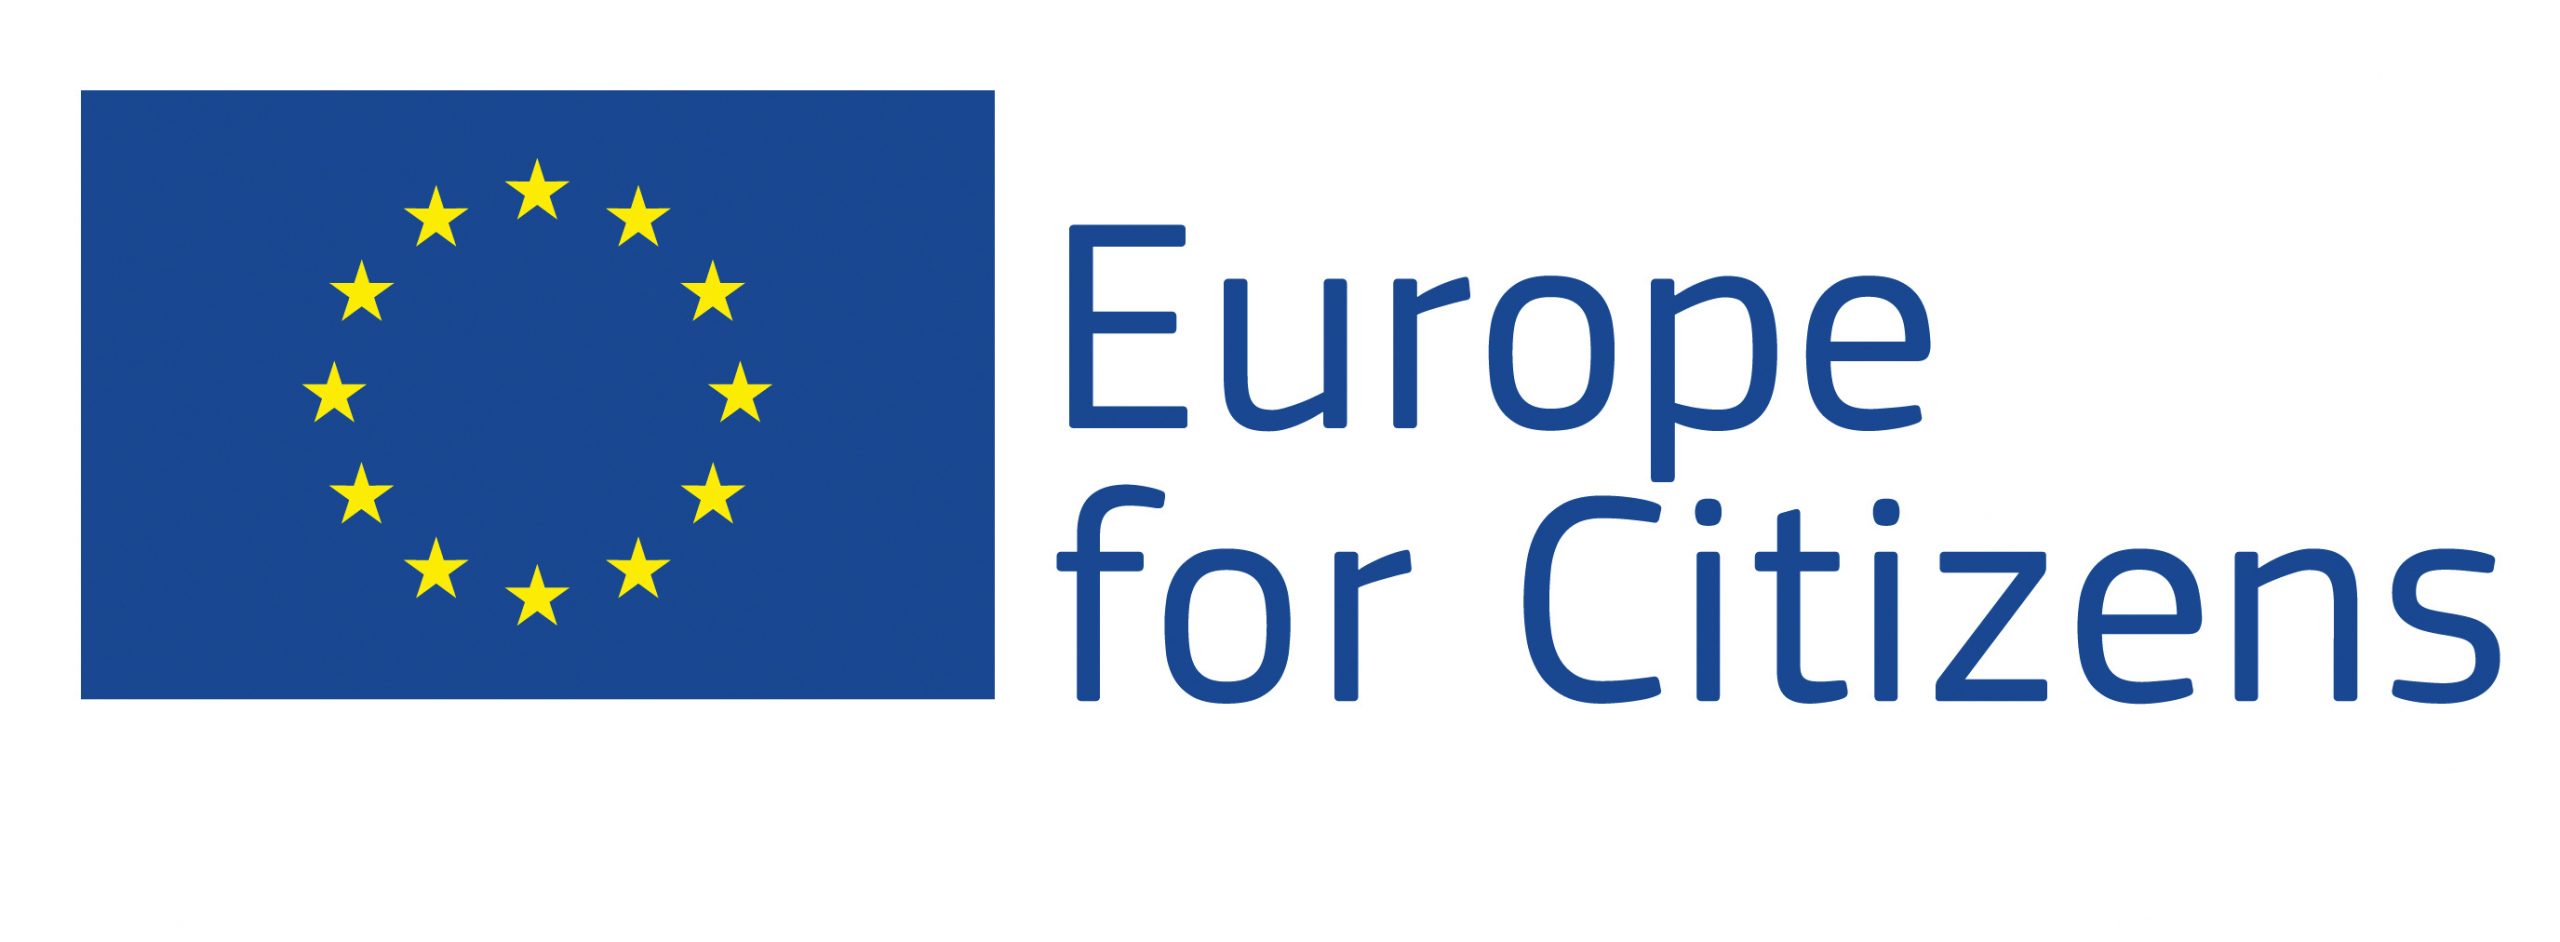 Europe for Citizens